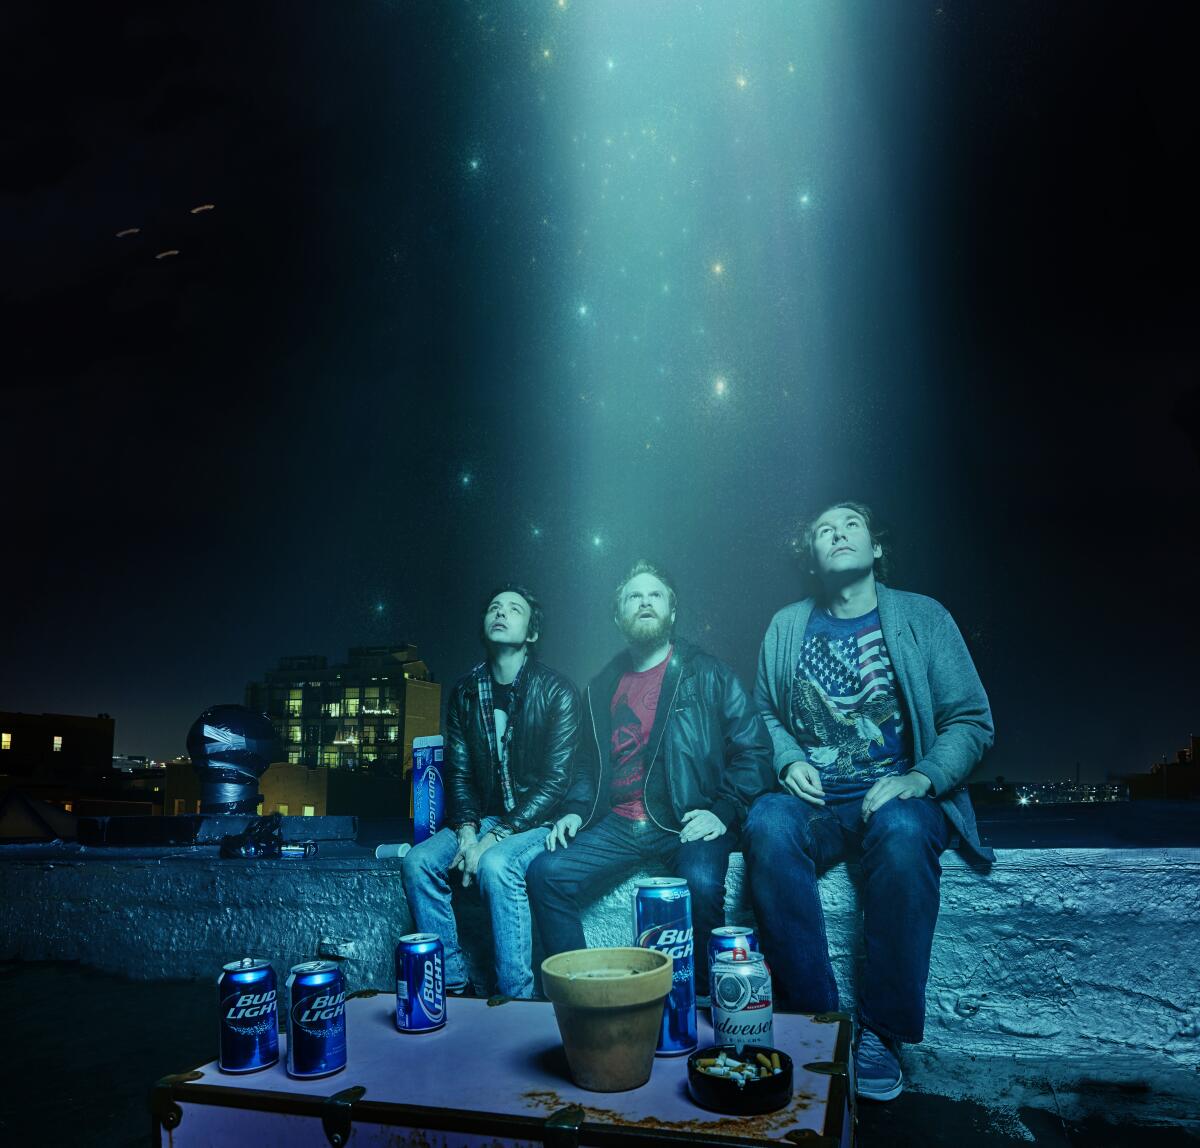 Three people look up into the sky as starlight shines down